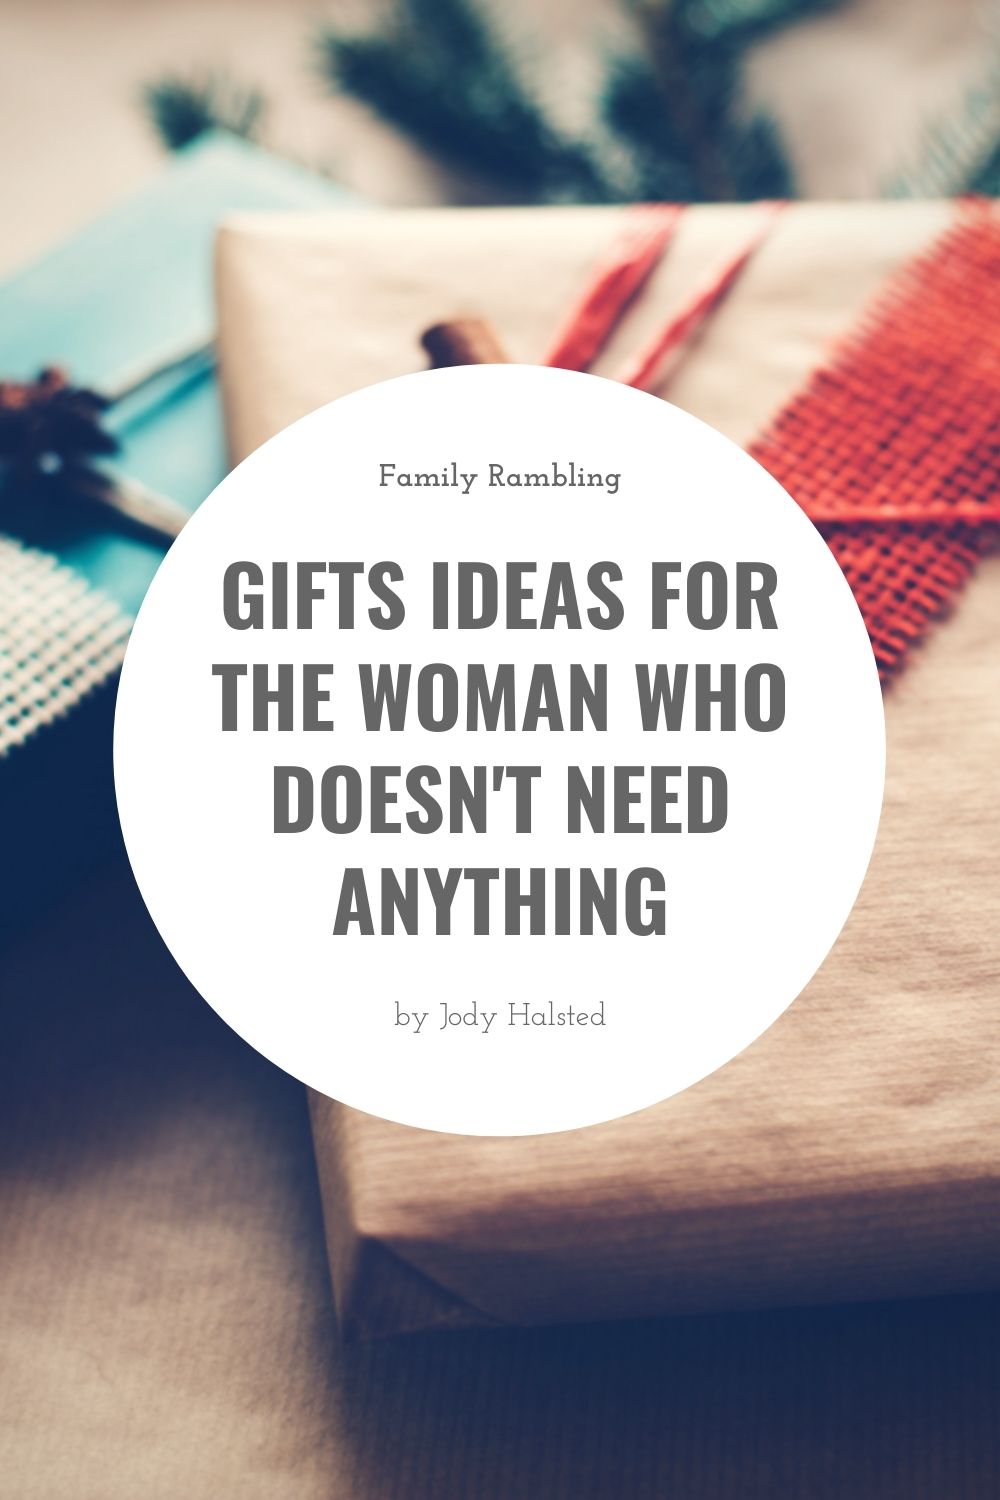 Gift Guide for the Woman Who 'Doesn't Need Anything' | Family Rambling